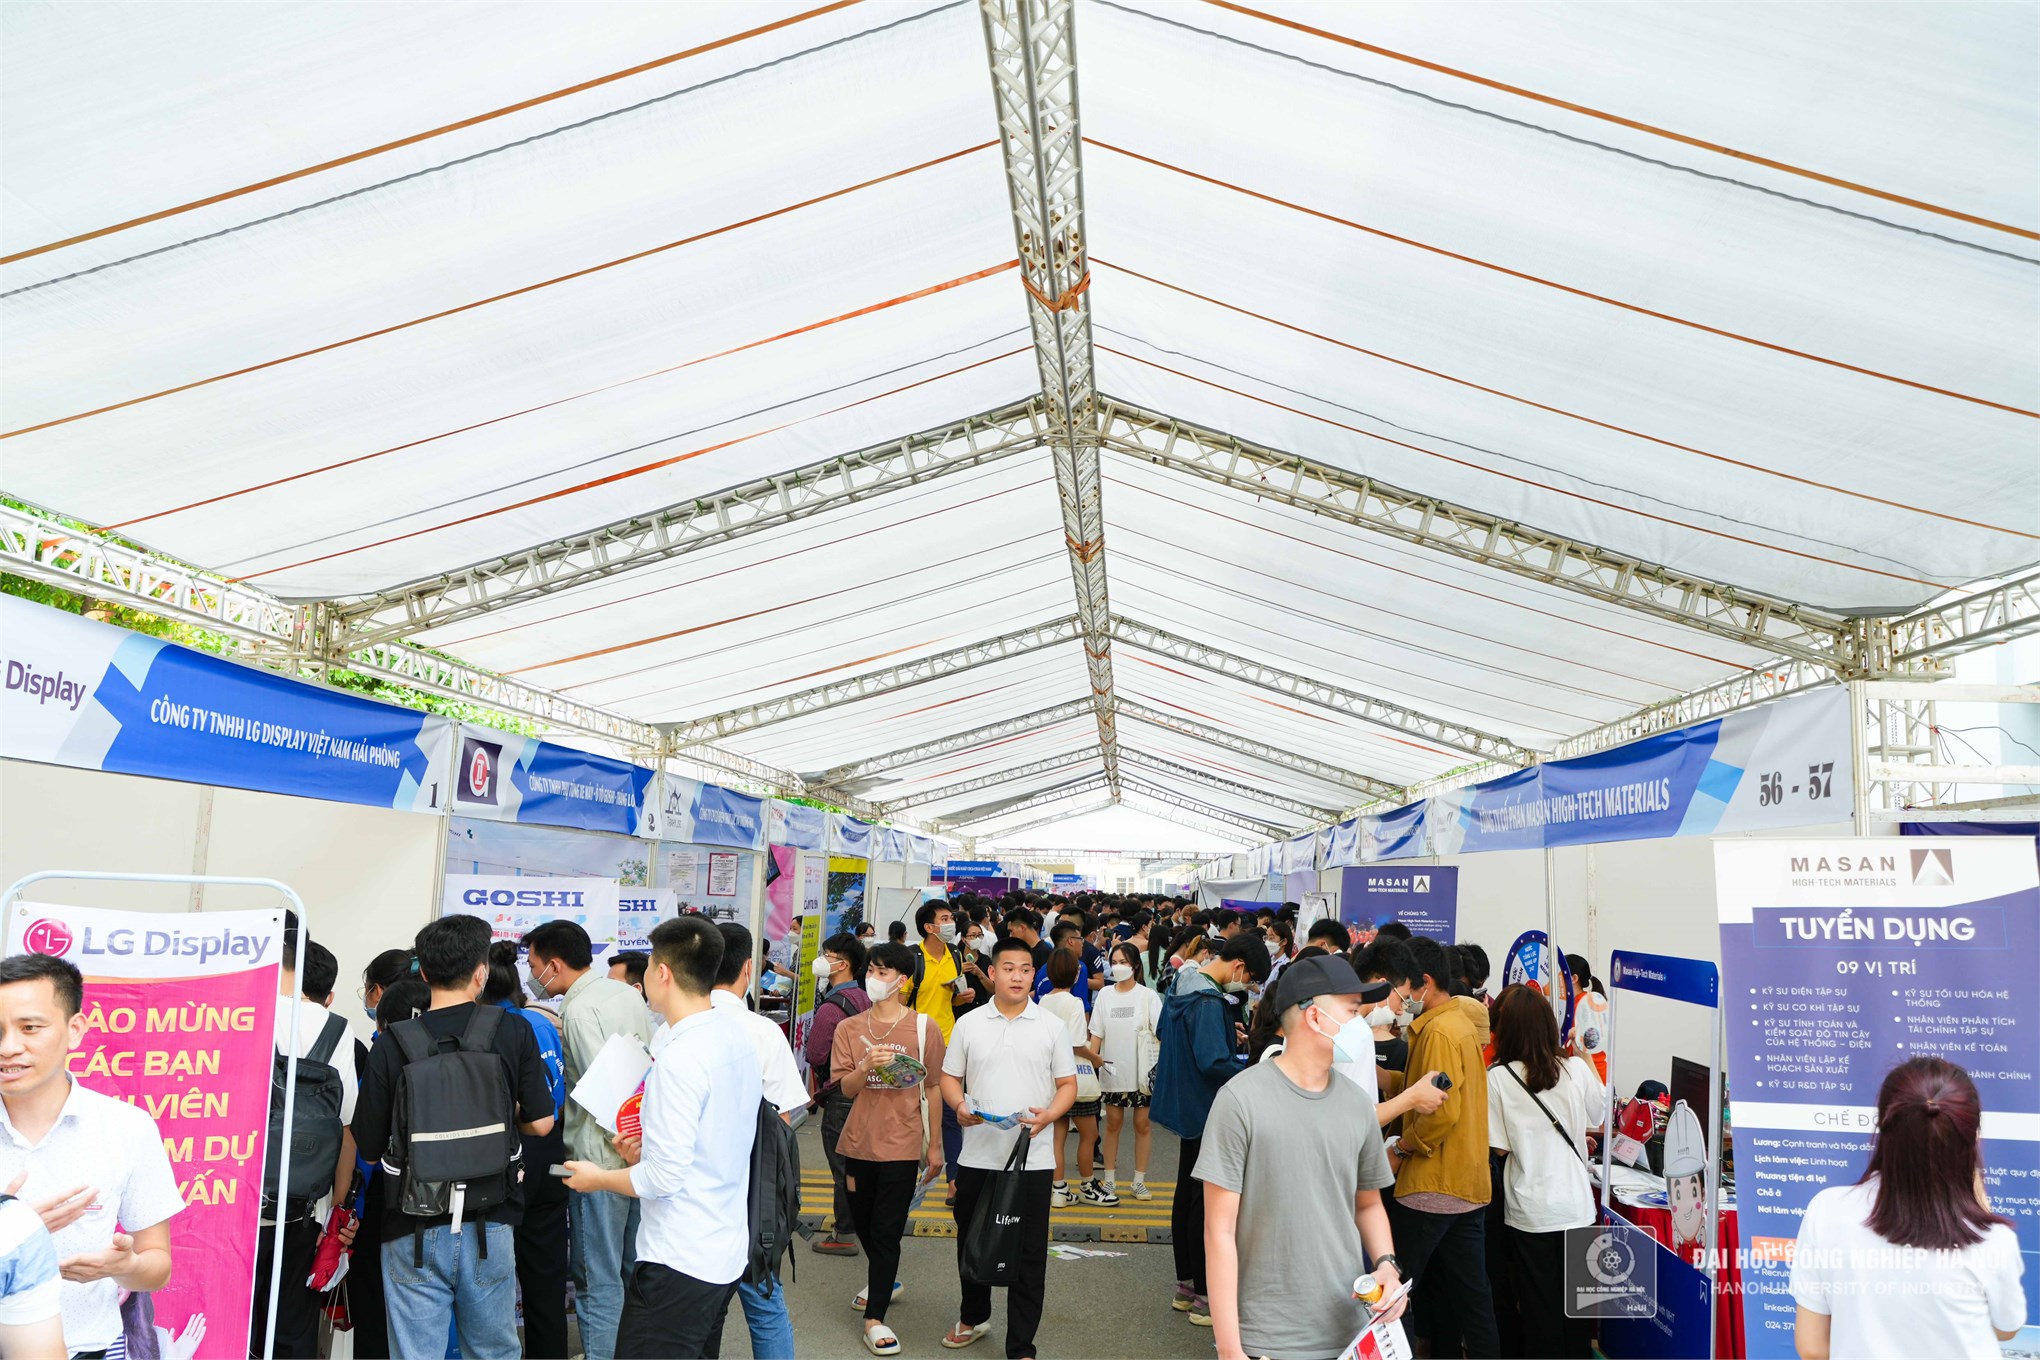 8,500 job opportunities for students of Hanoi University of Industry at the Job Fair 2022